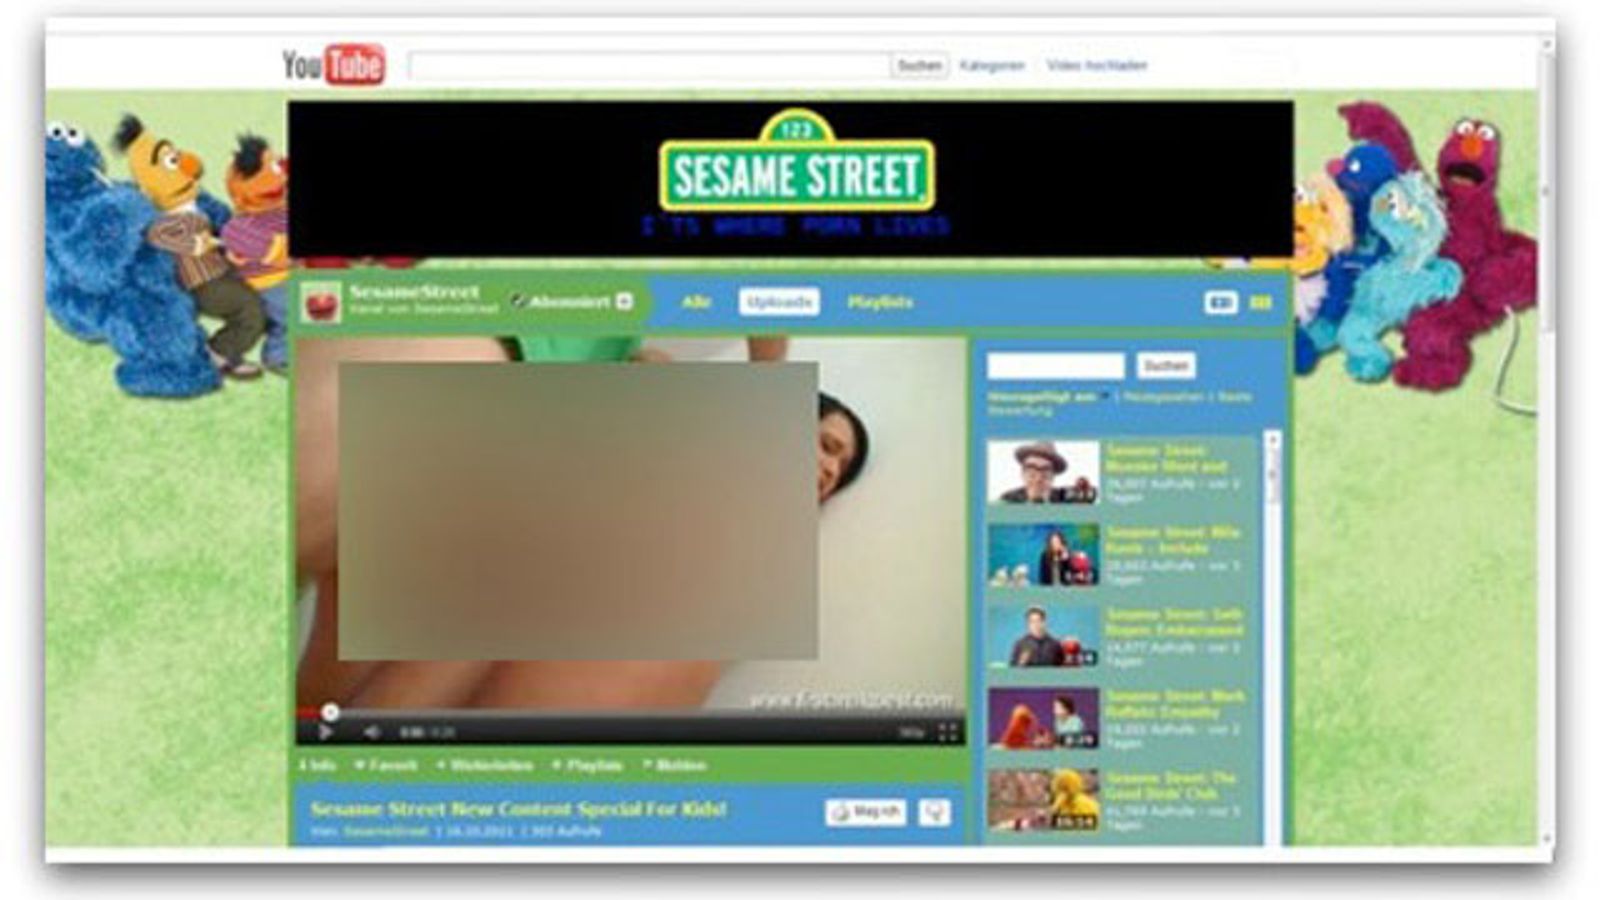 Sesame Street YouTube Page Back to Normal Following Porn Hack